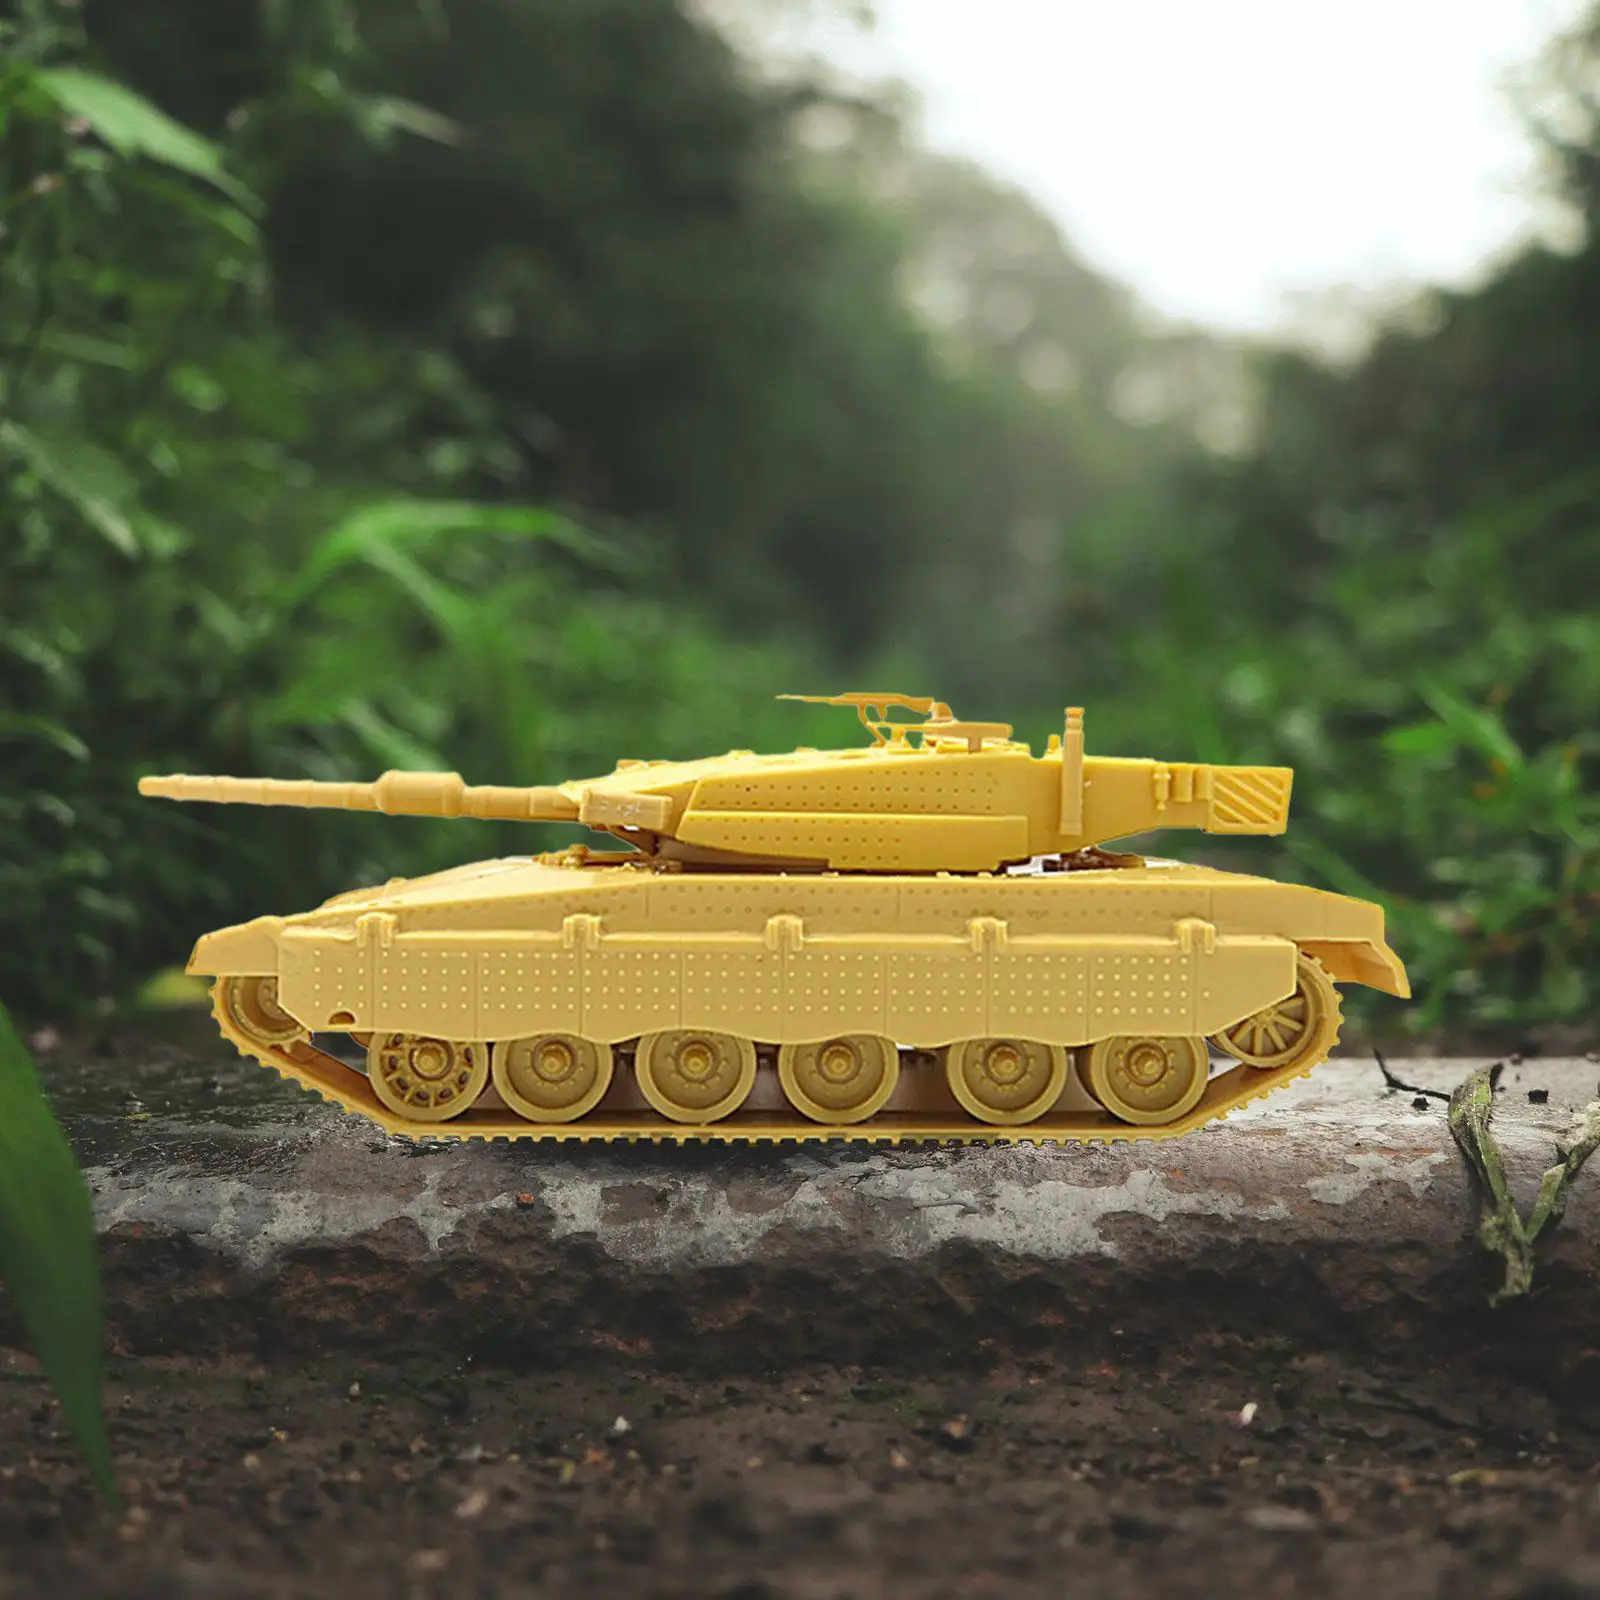 1:72 Scale Tank Model Kits Vehicle Tank Model Toy DIY Assemble Simulation Table Scene Collection for Kids Girls Adults Boy